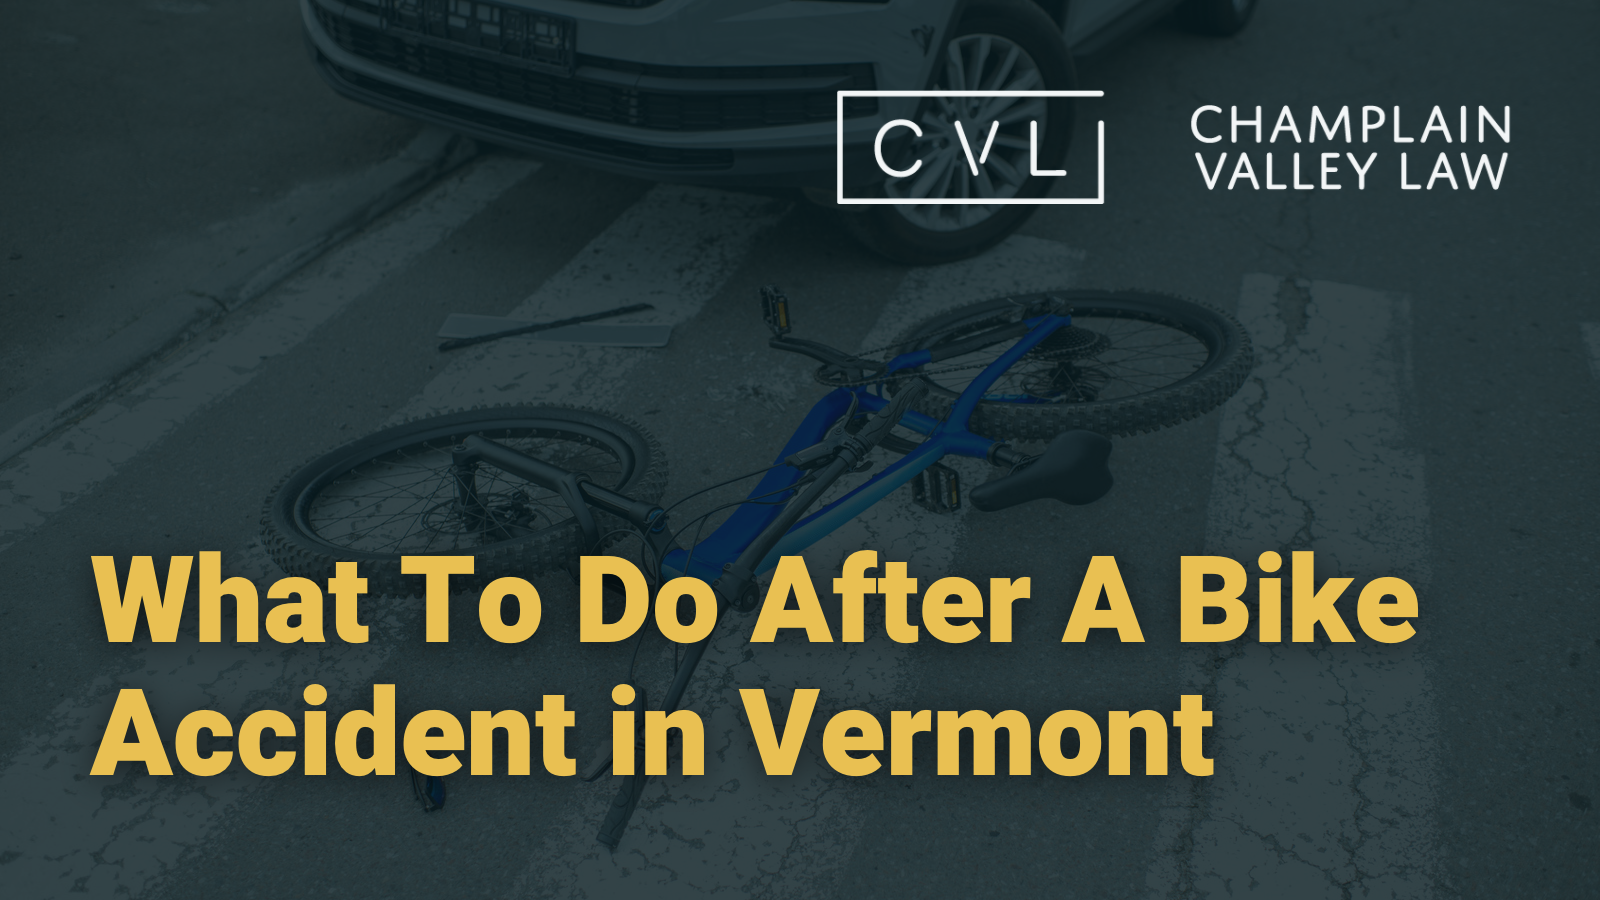 What To Do After A Bike Accident in vermont - Champlain Valley Law - Attorney Drew Palcsik